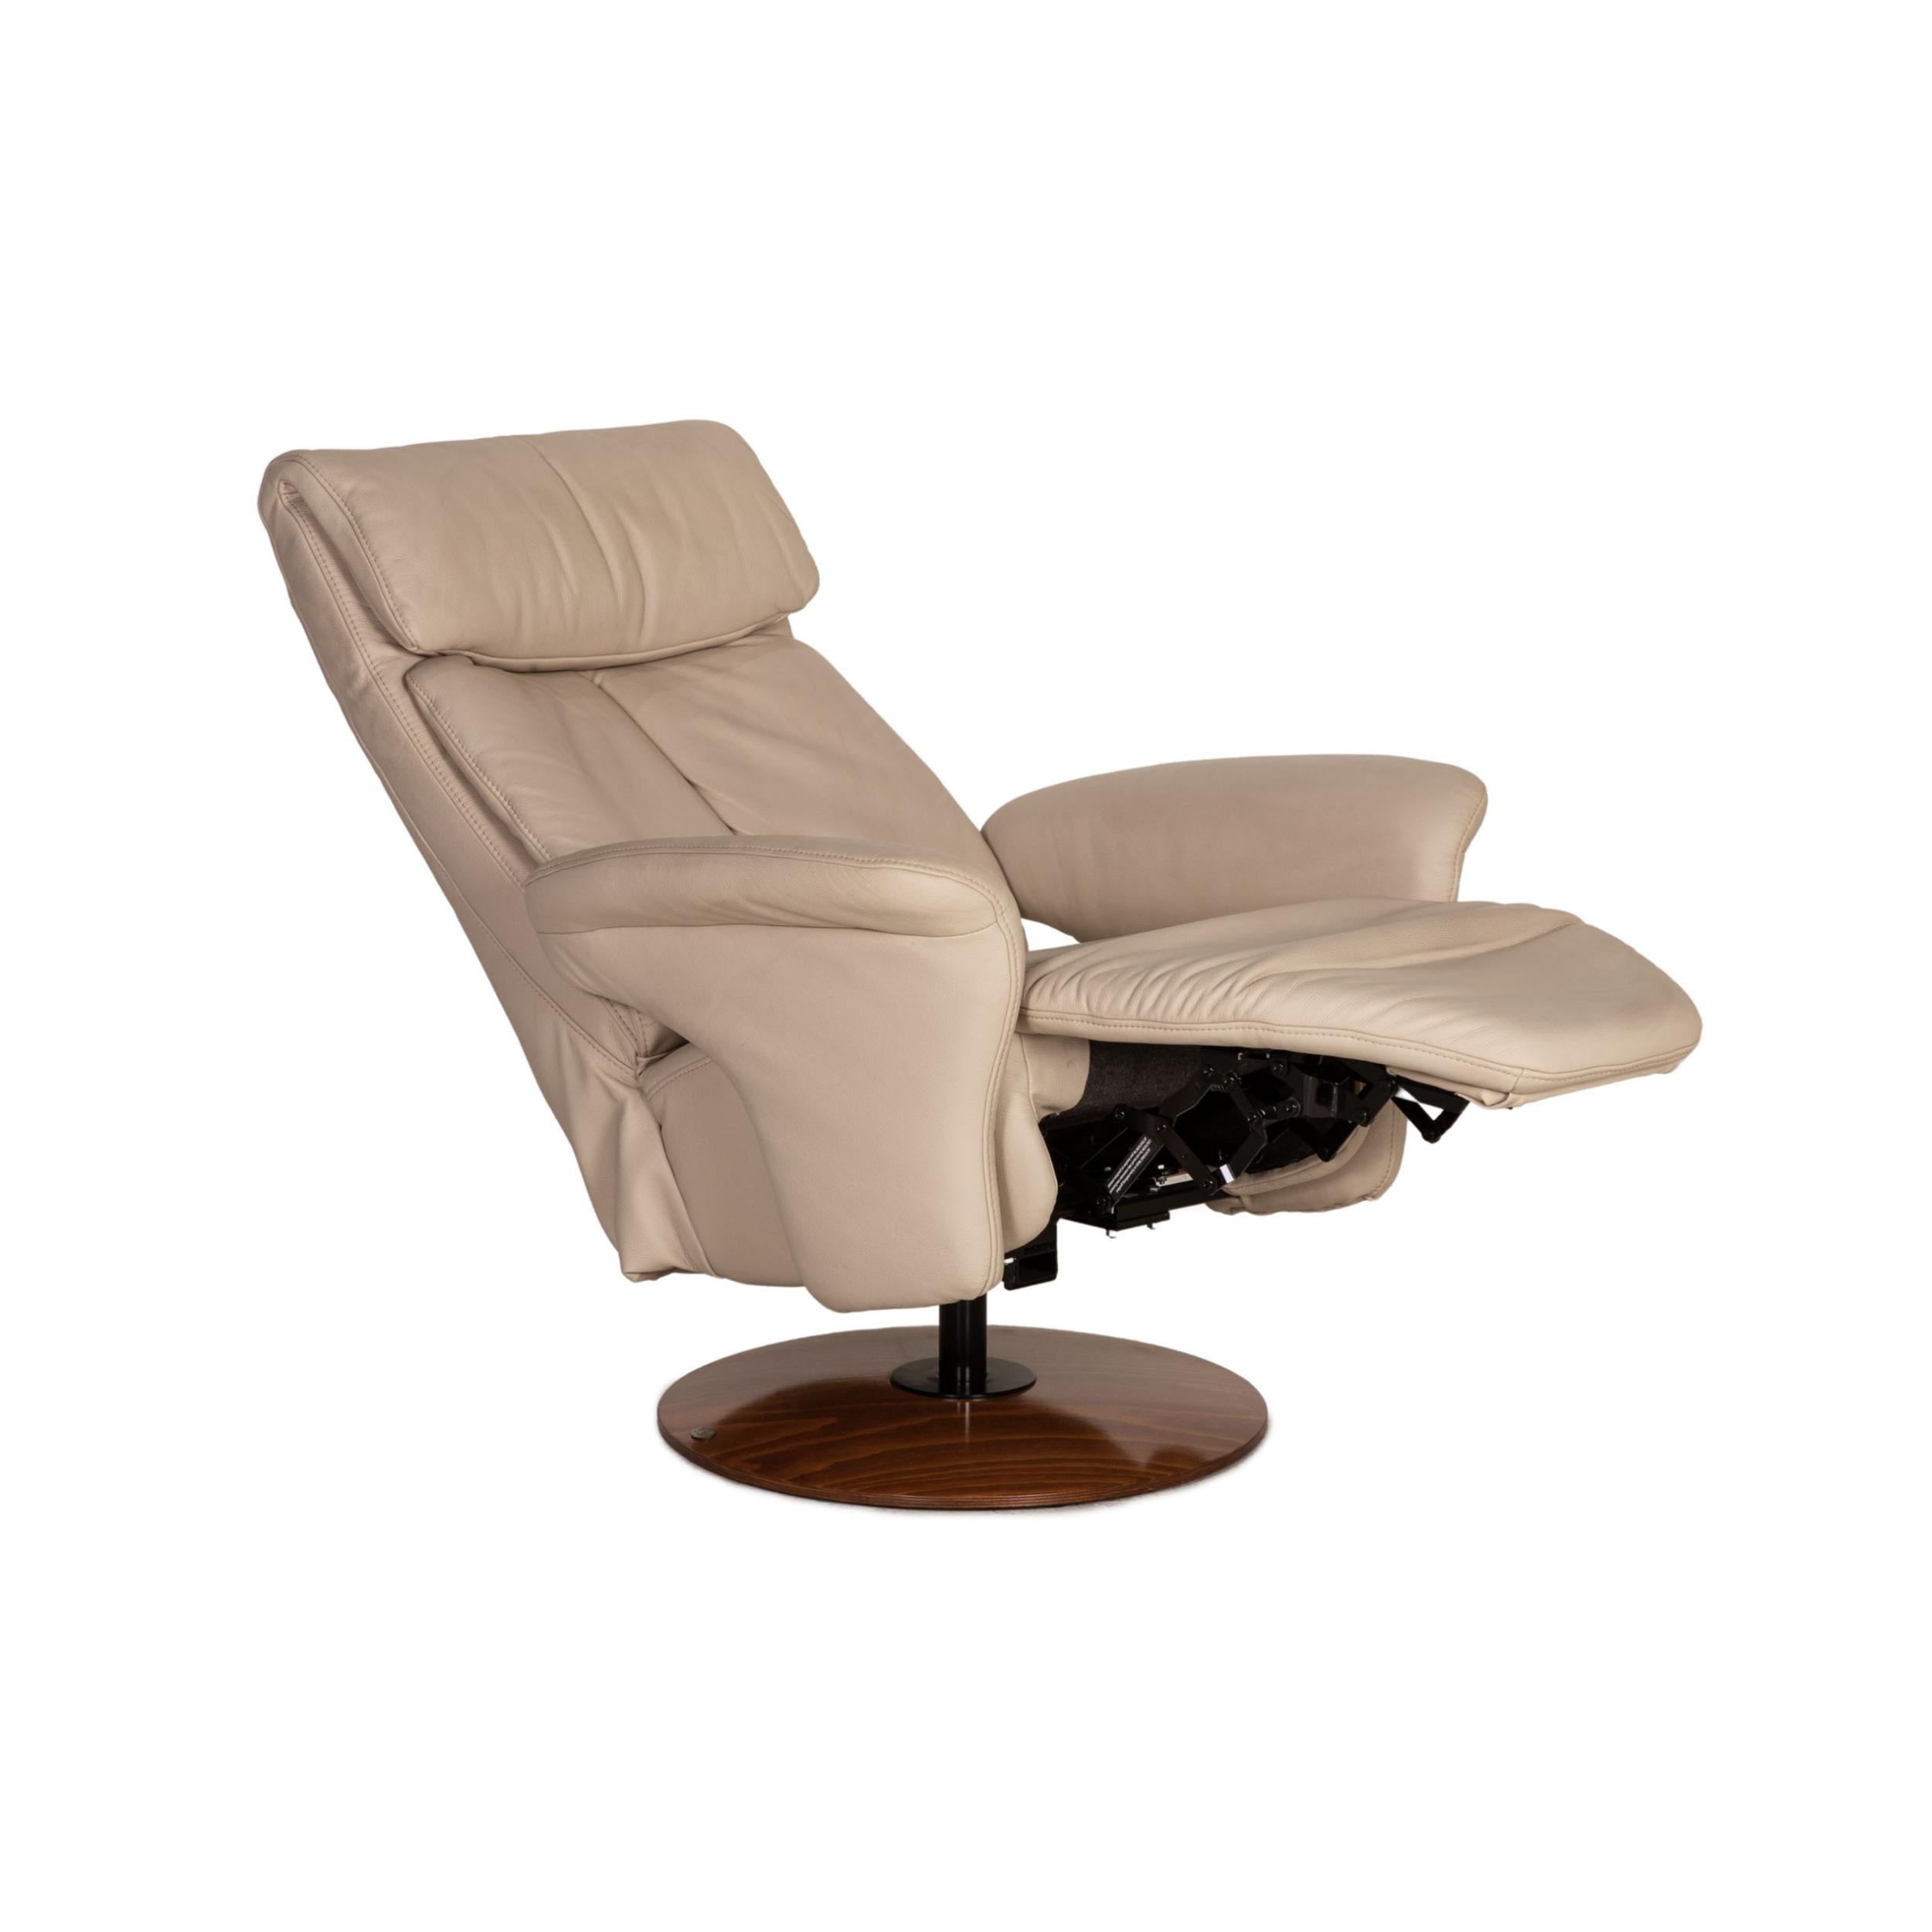 Modern Himolla Leather Armchair Cream Function Relaxation Function For Sale